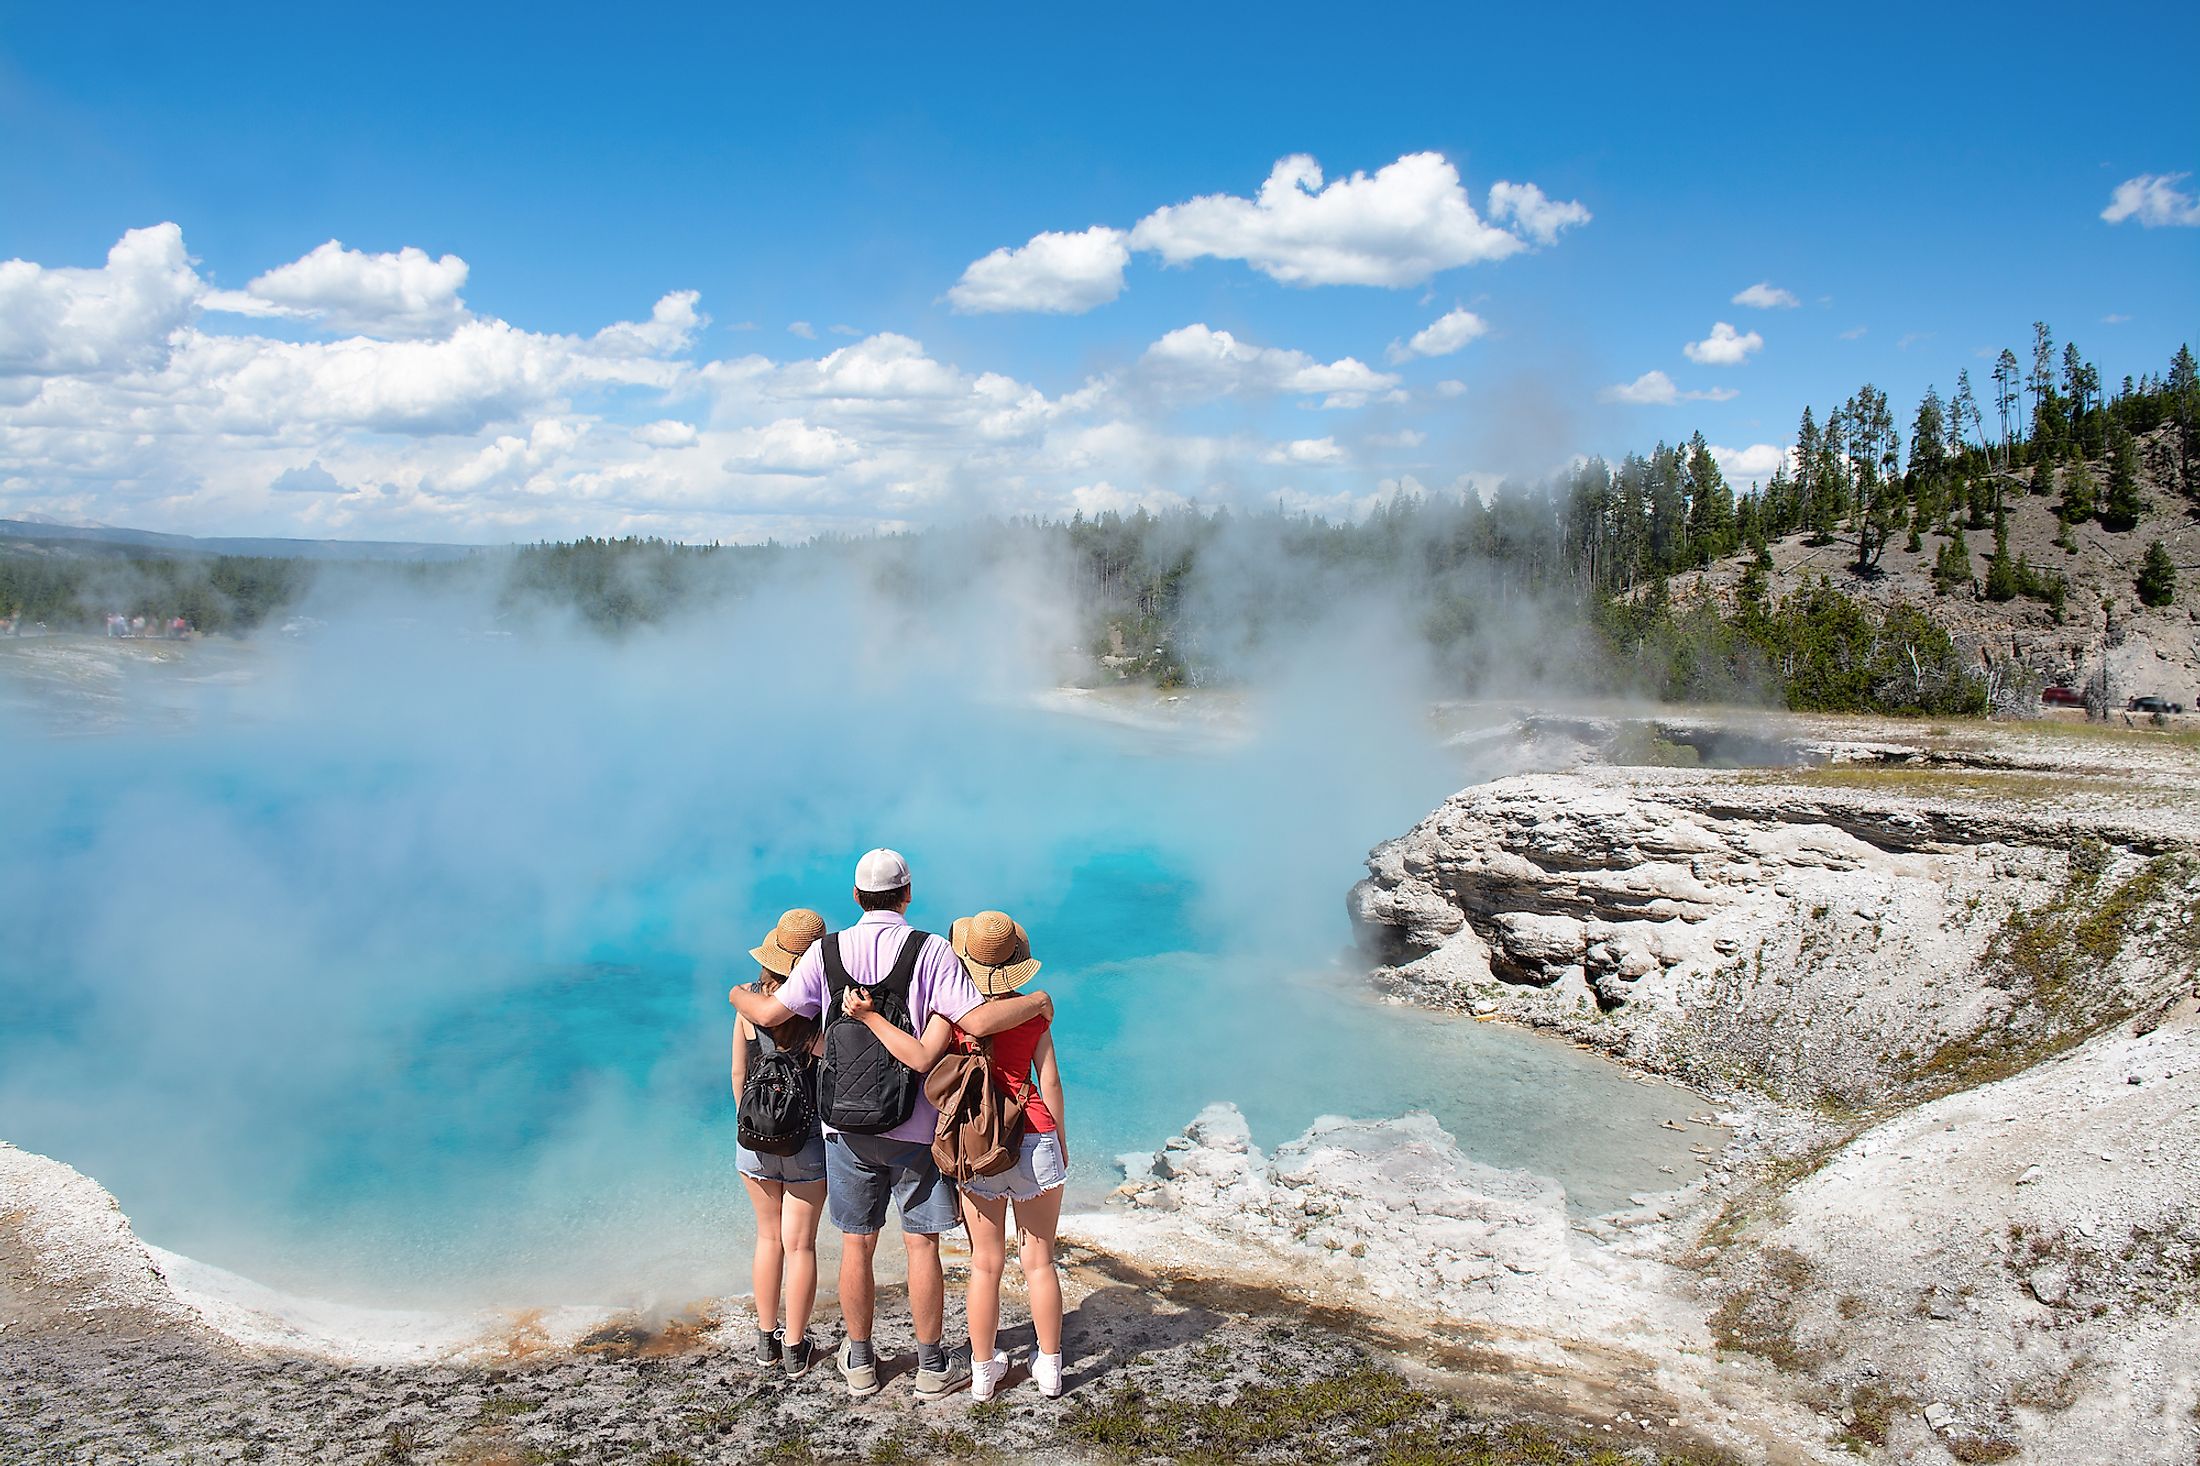 A family of tourists enjoying the view of a geyser in Yellowstone National Park. Wyoming, USA.